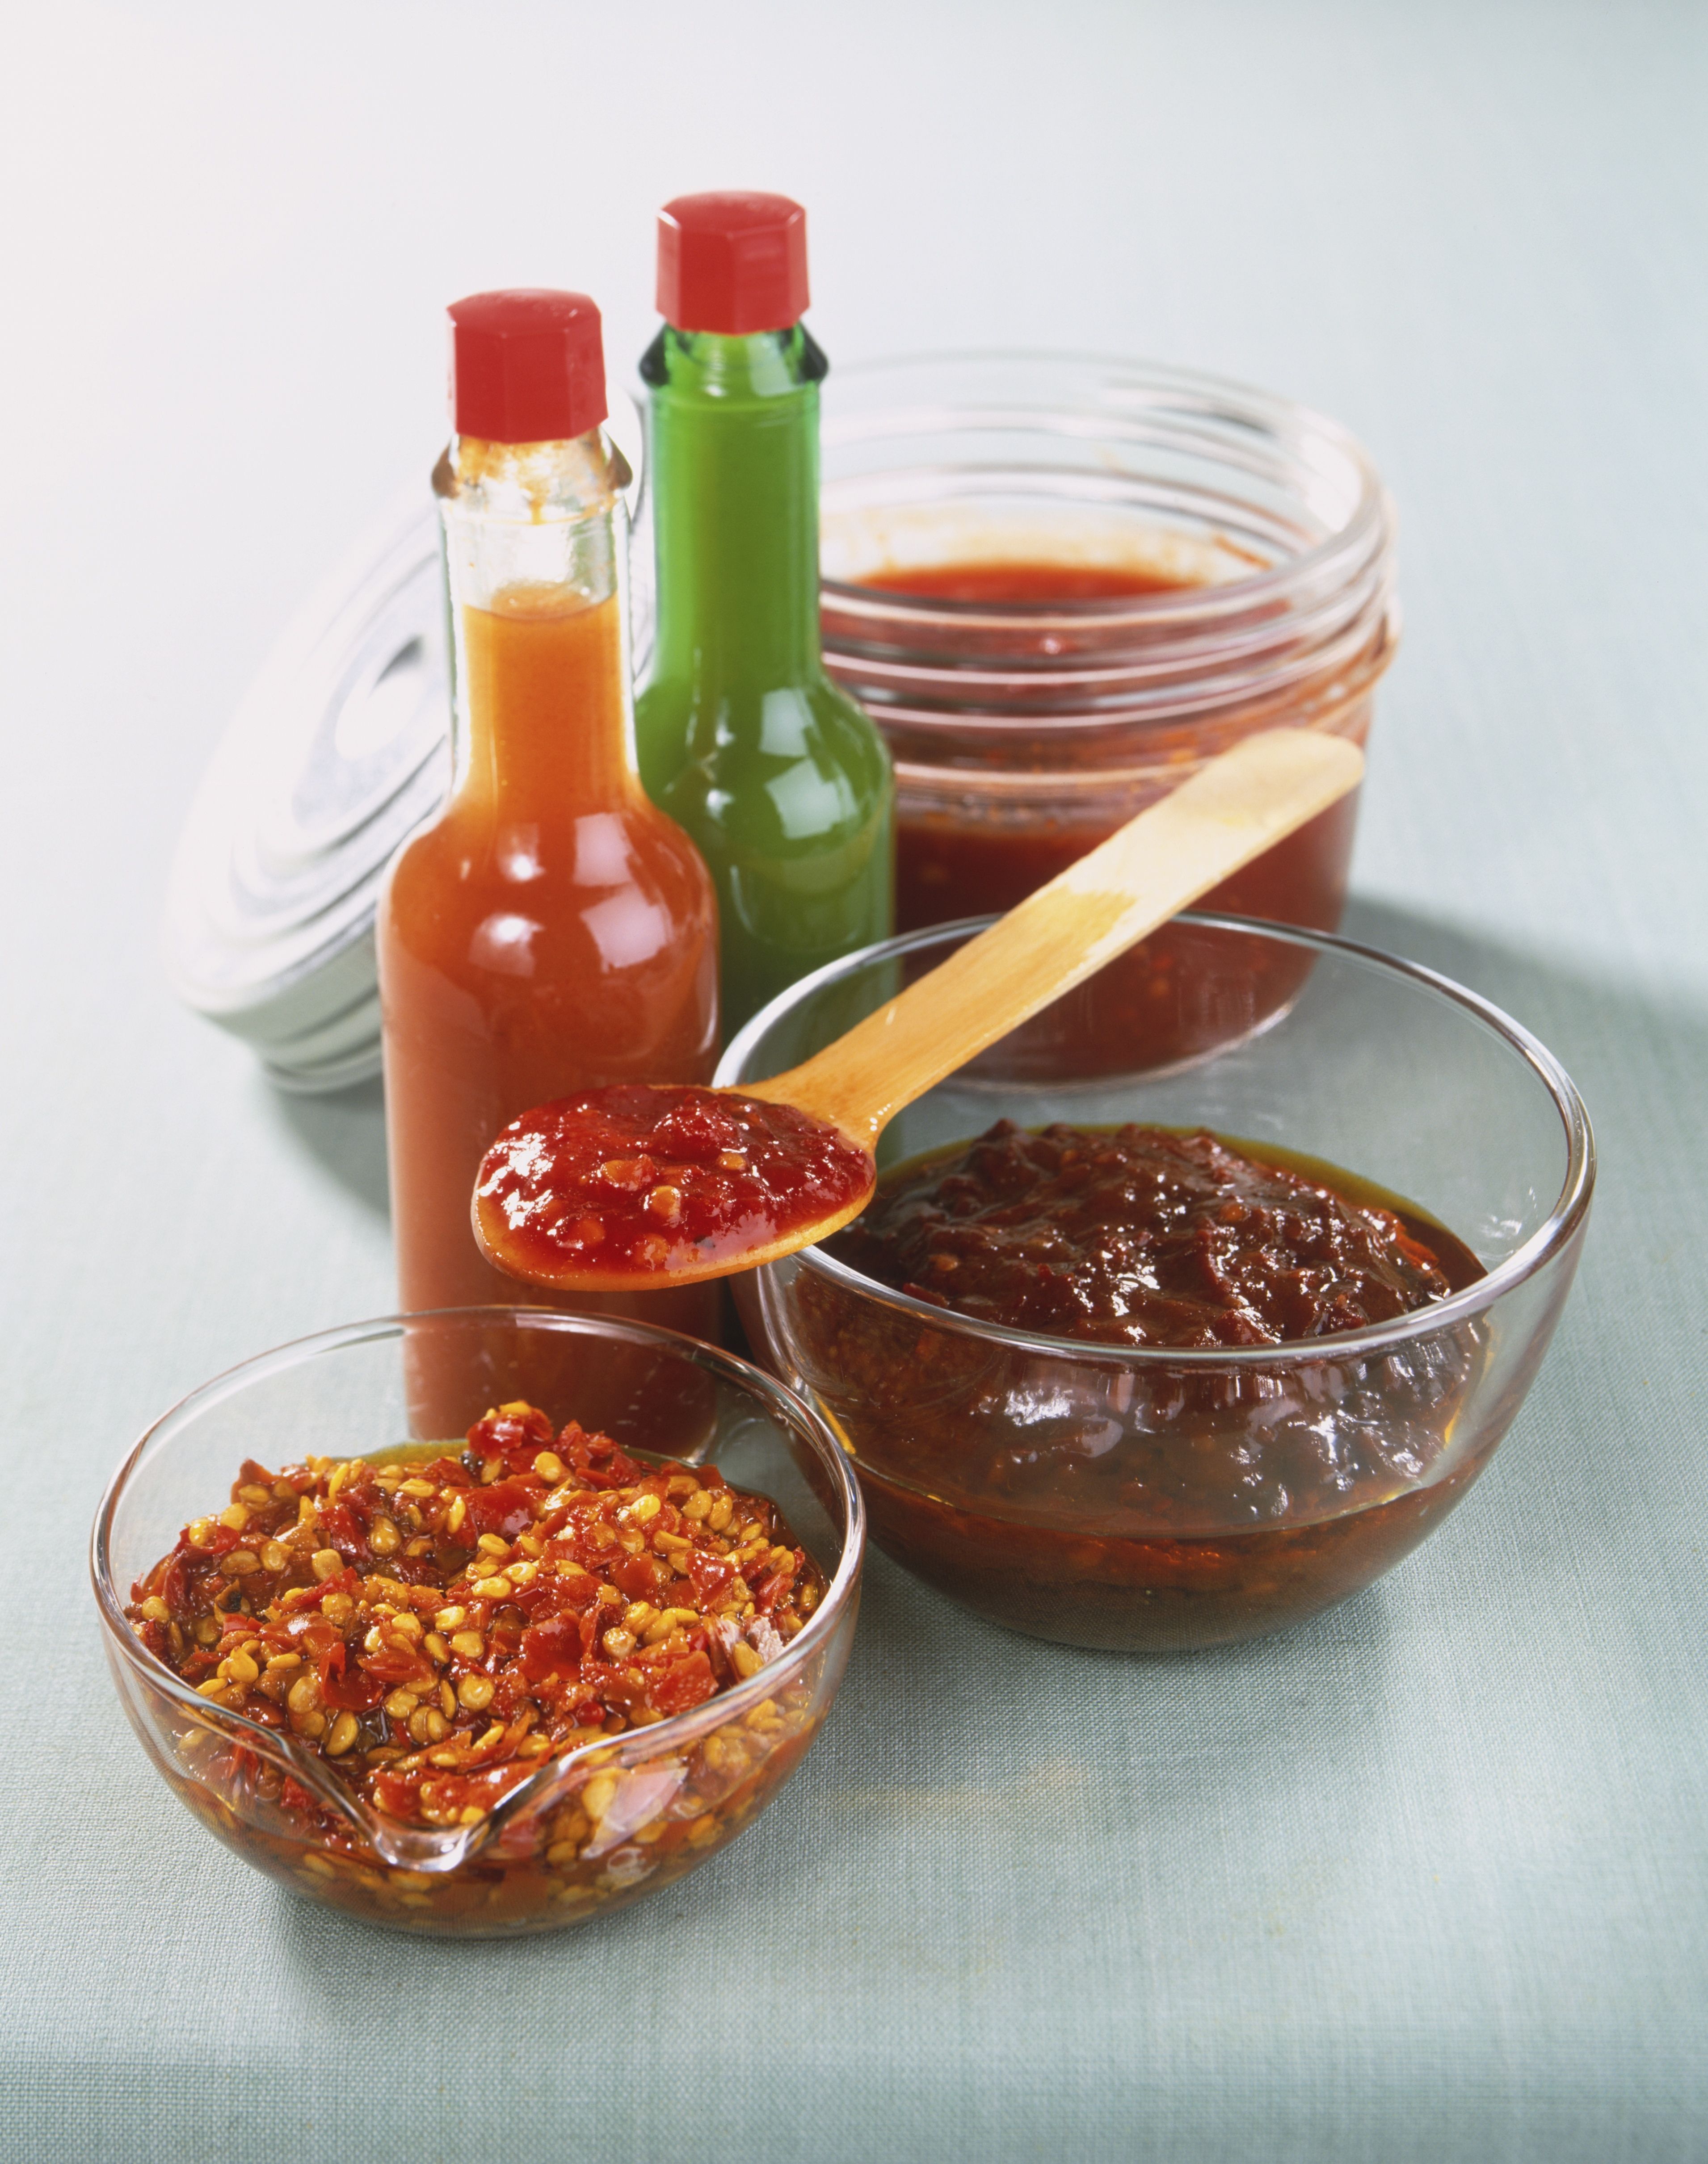 How to Make Caribbean Style Hot Pepper Sauce